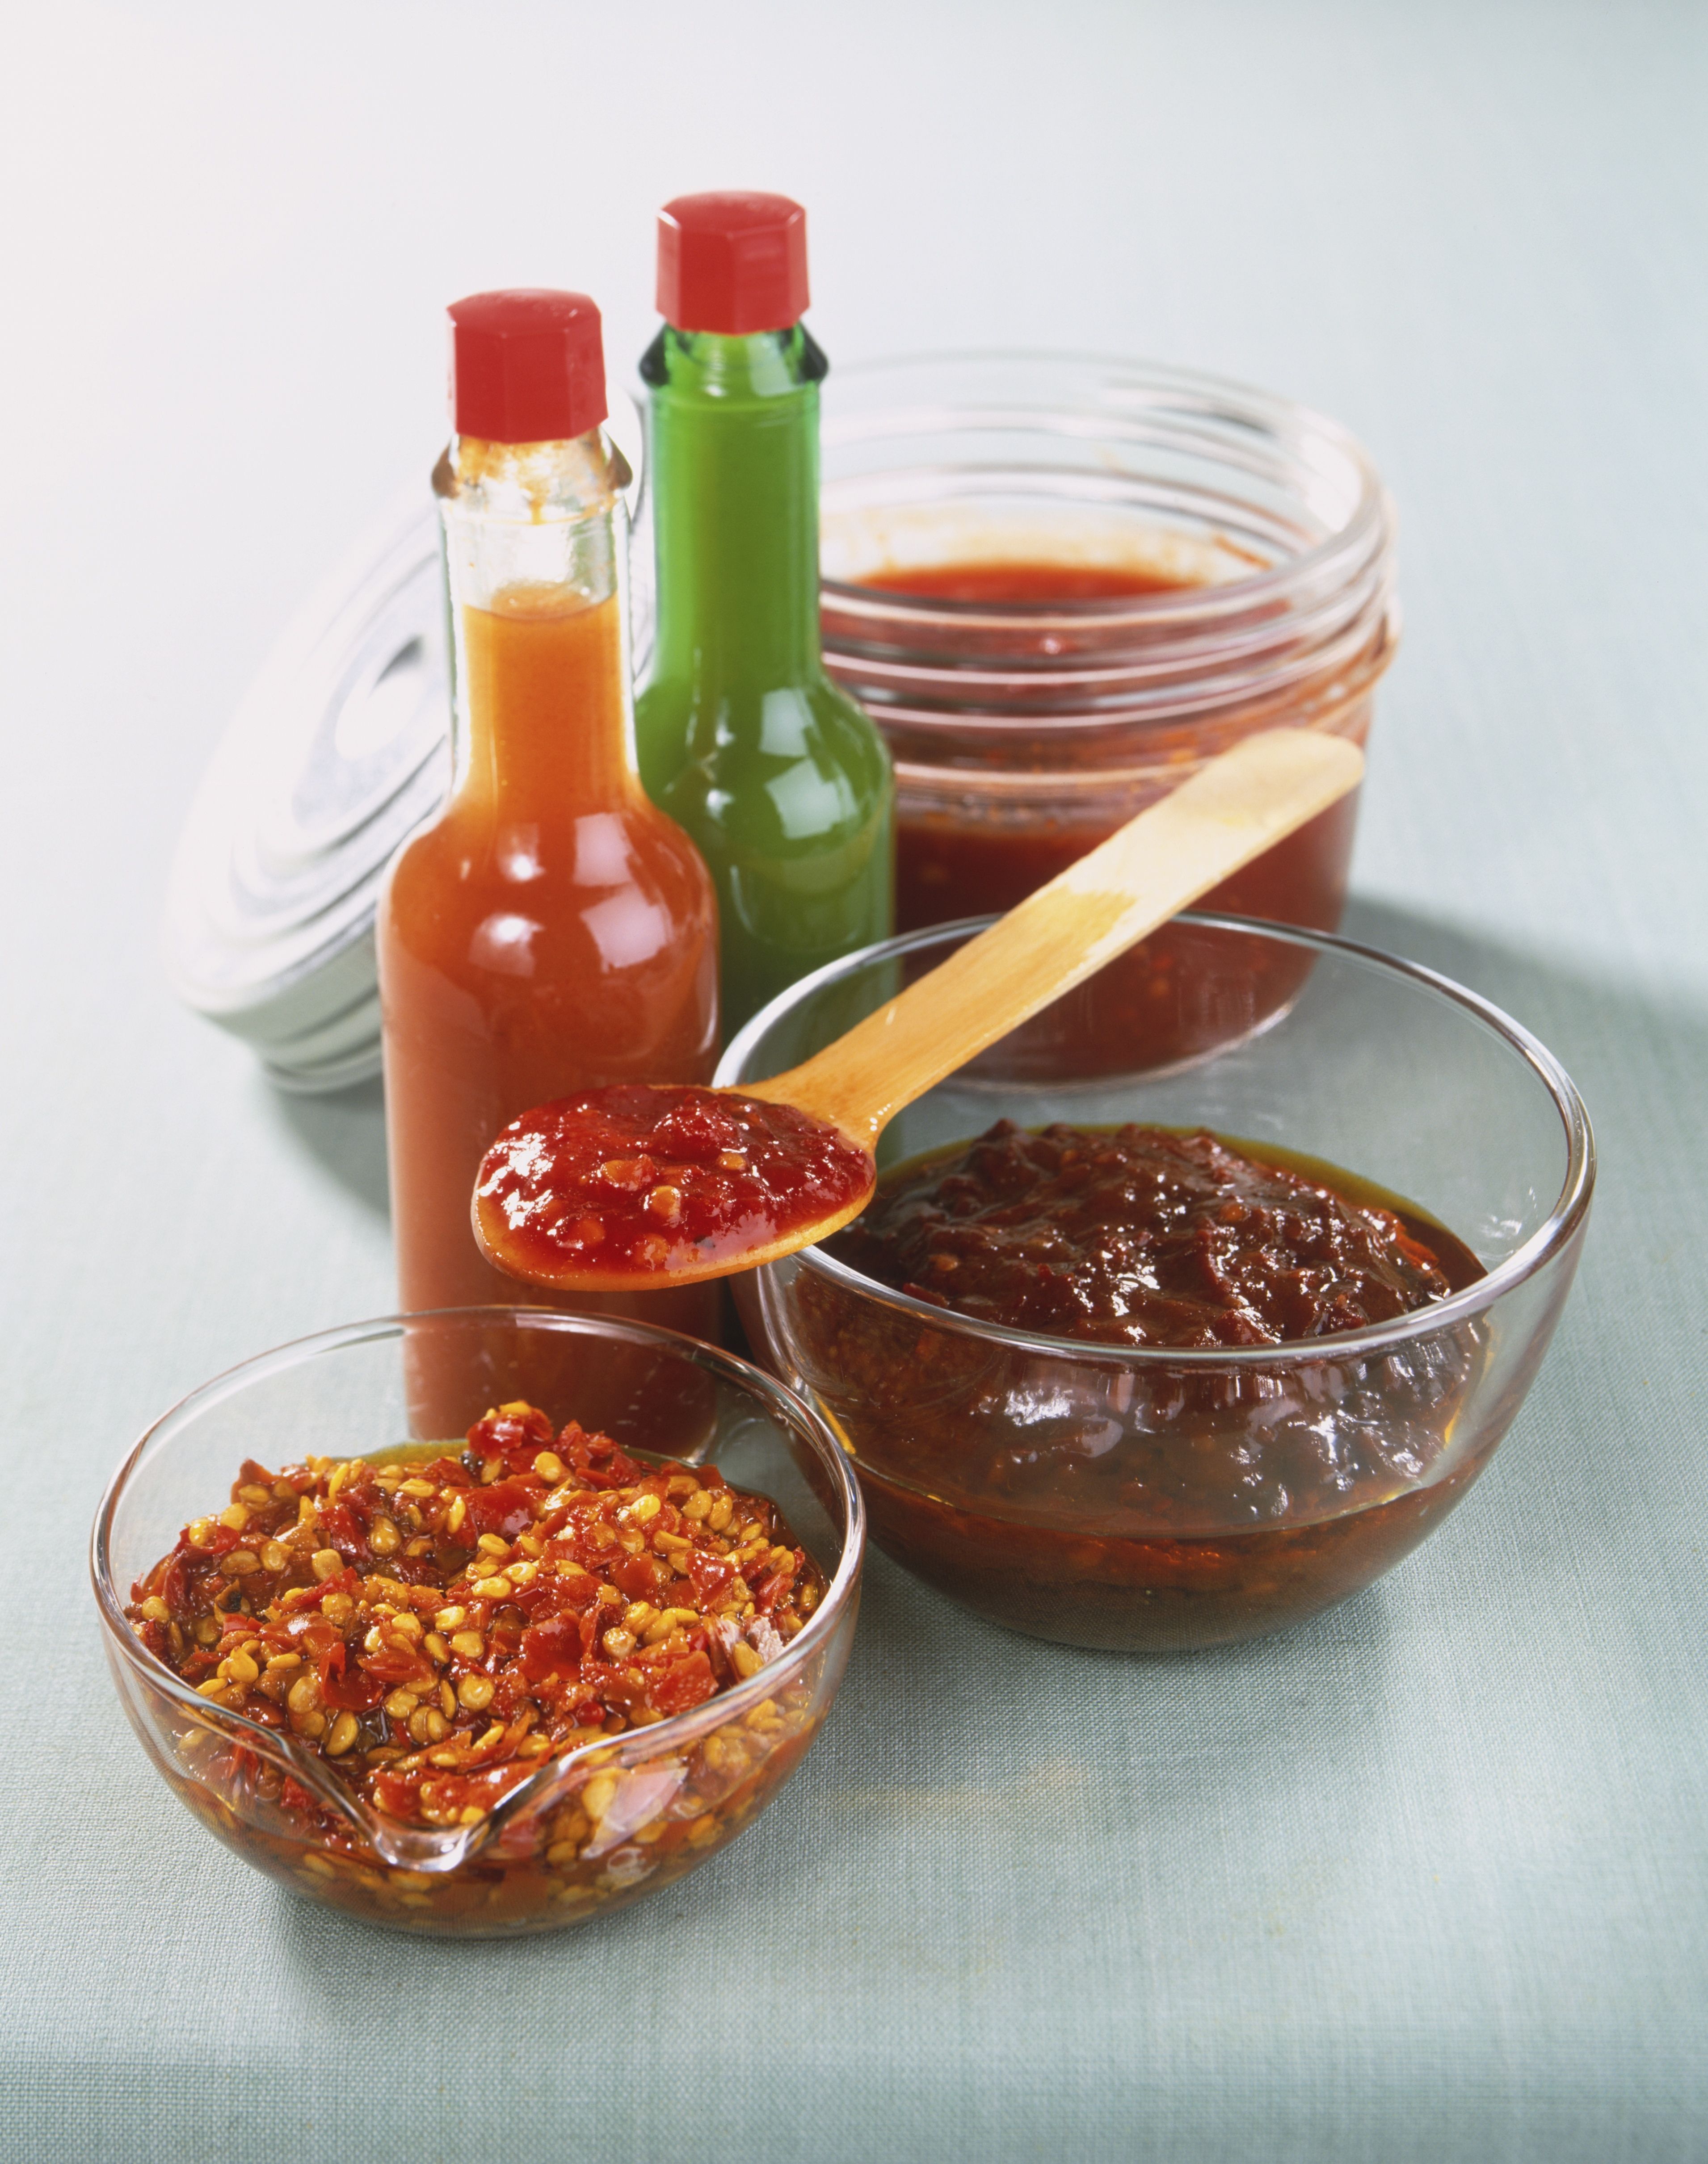 How to Make Caribbean Style Hot Pepper Sauce